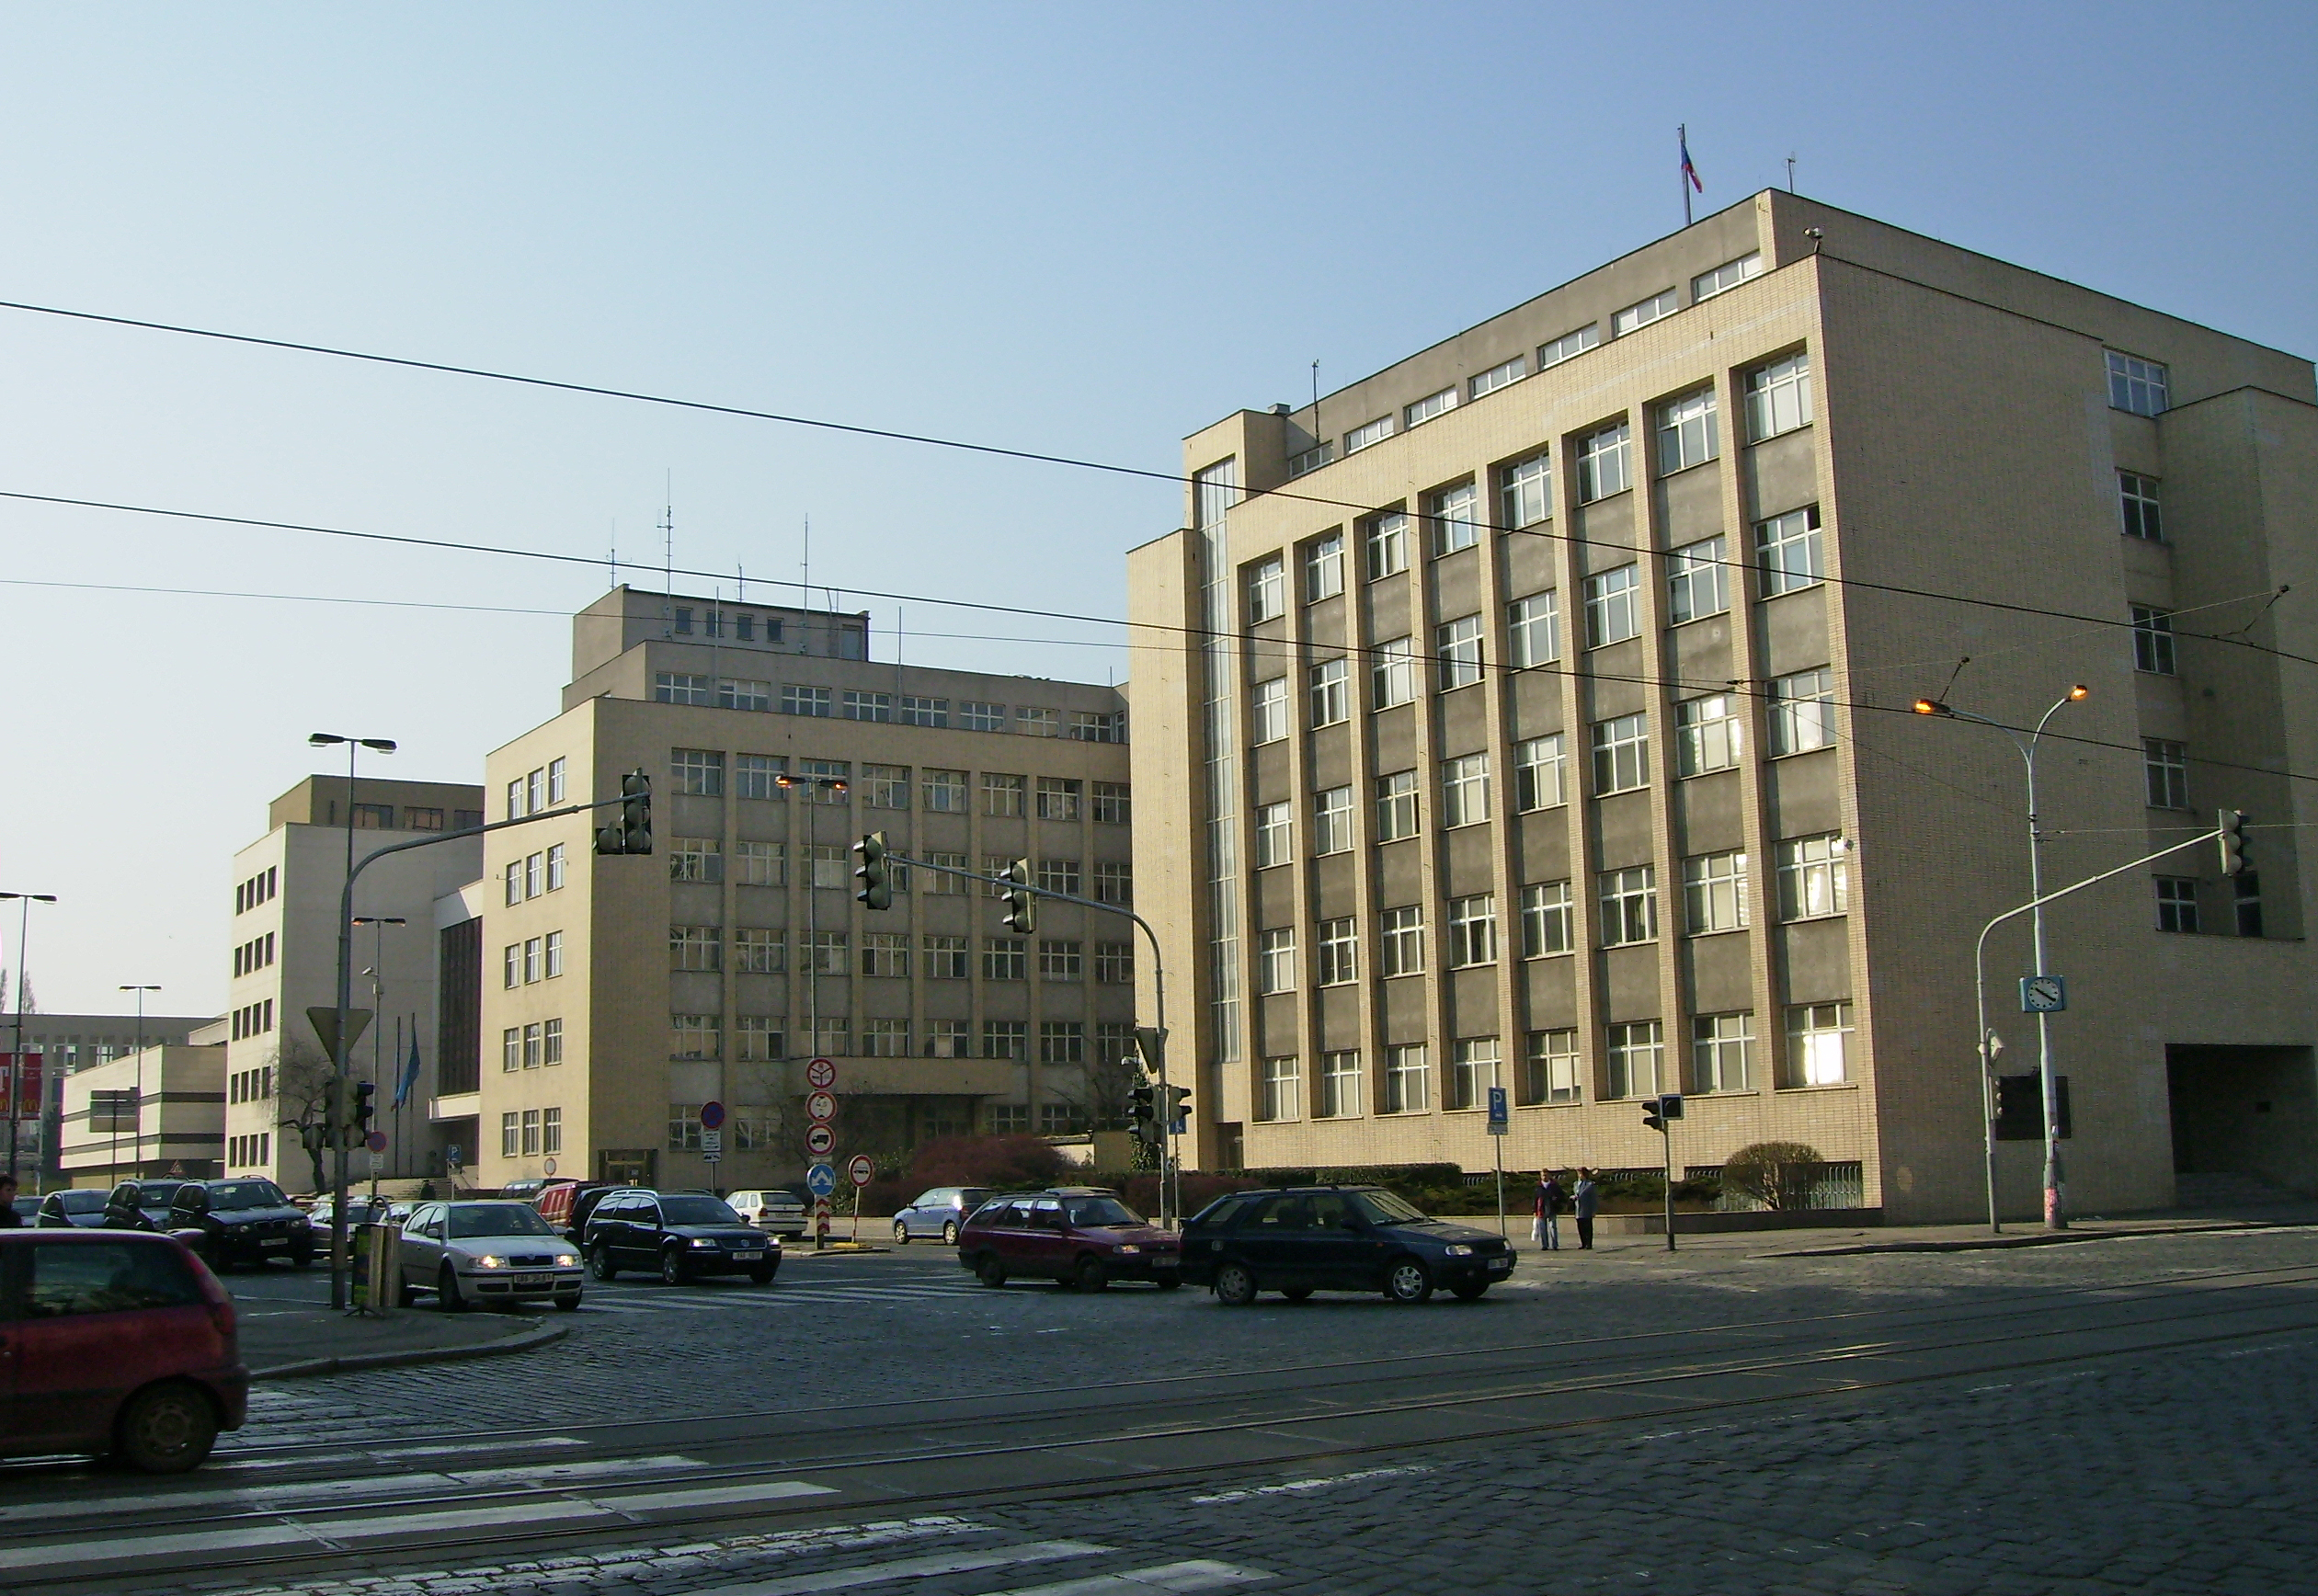 Ministry of Interior of the Czech Republic, Prague 7